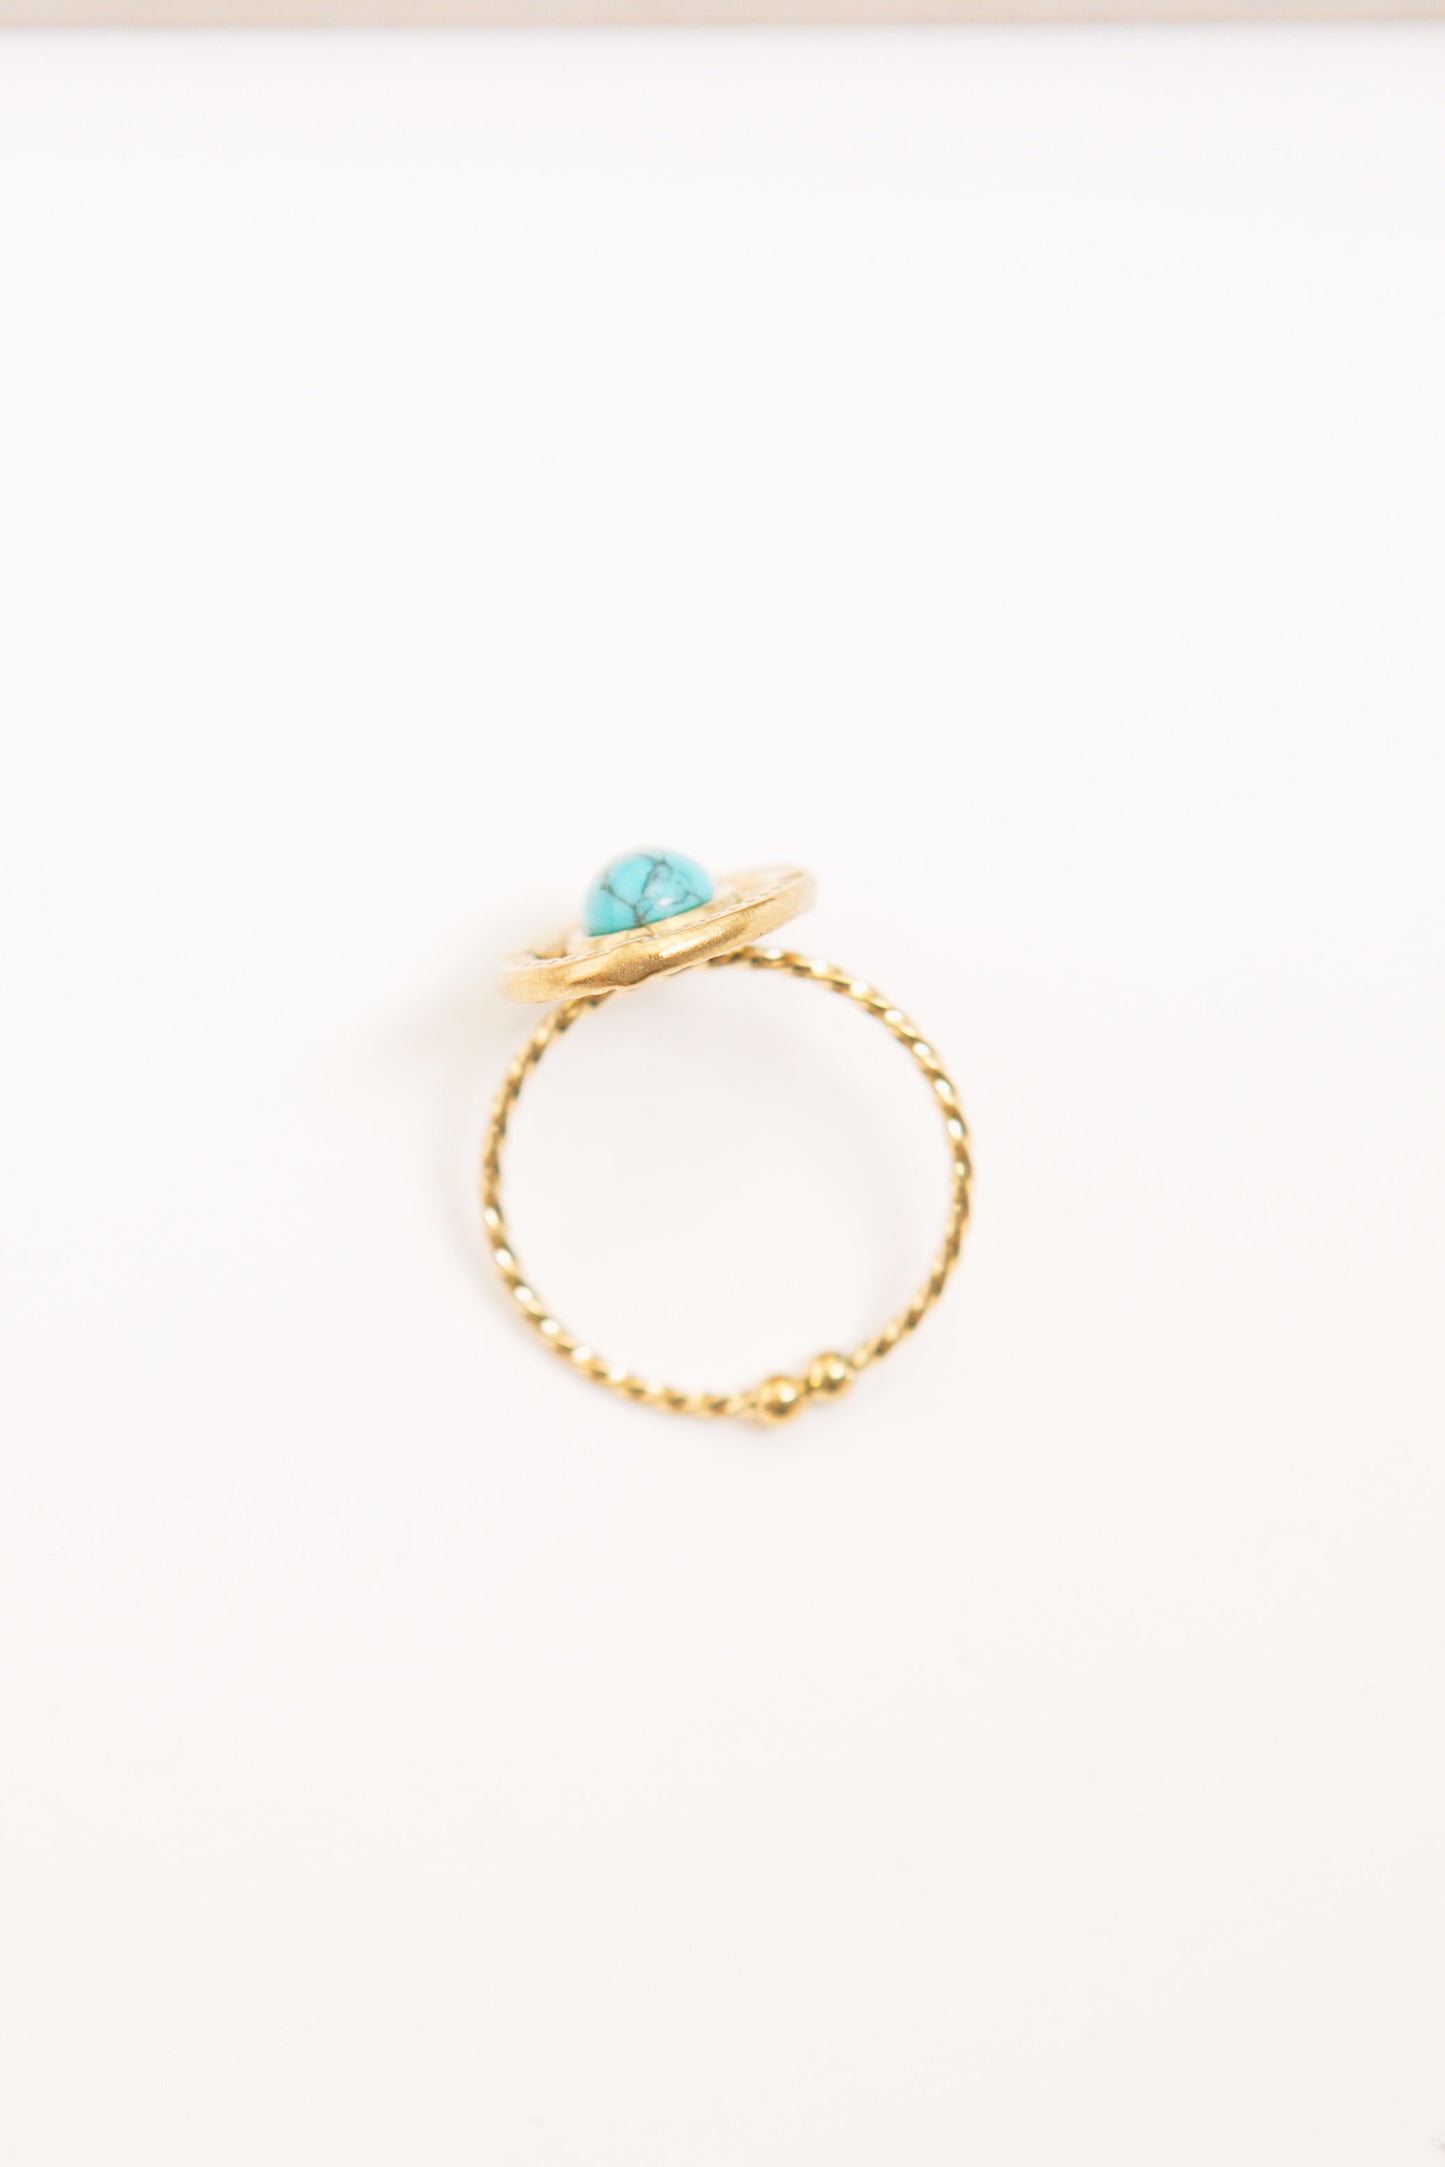 Blue Oval Stone Ring